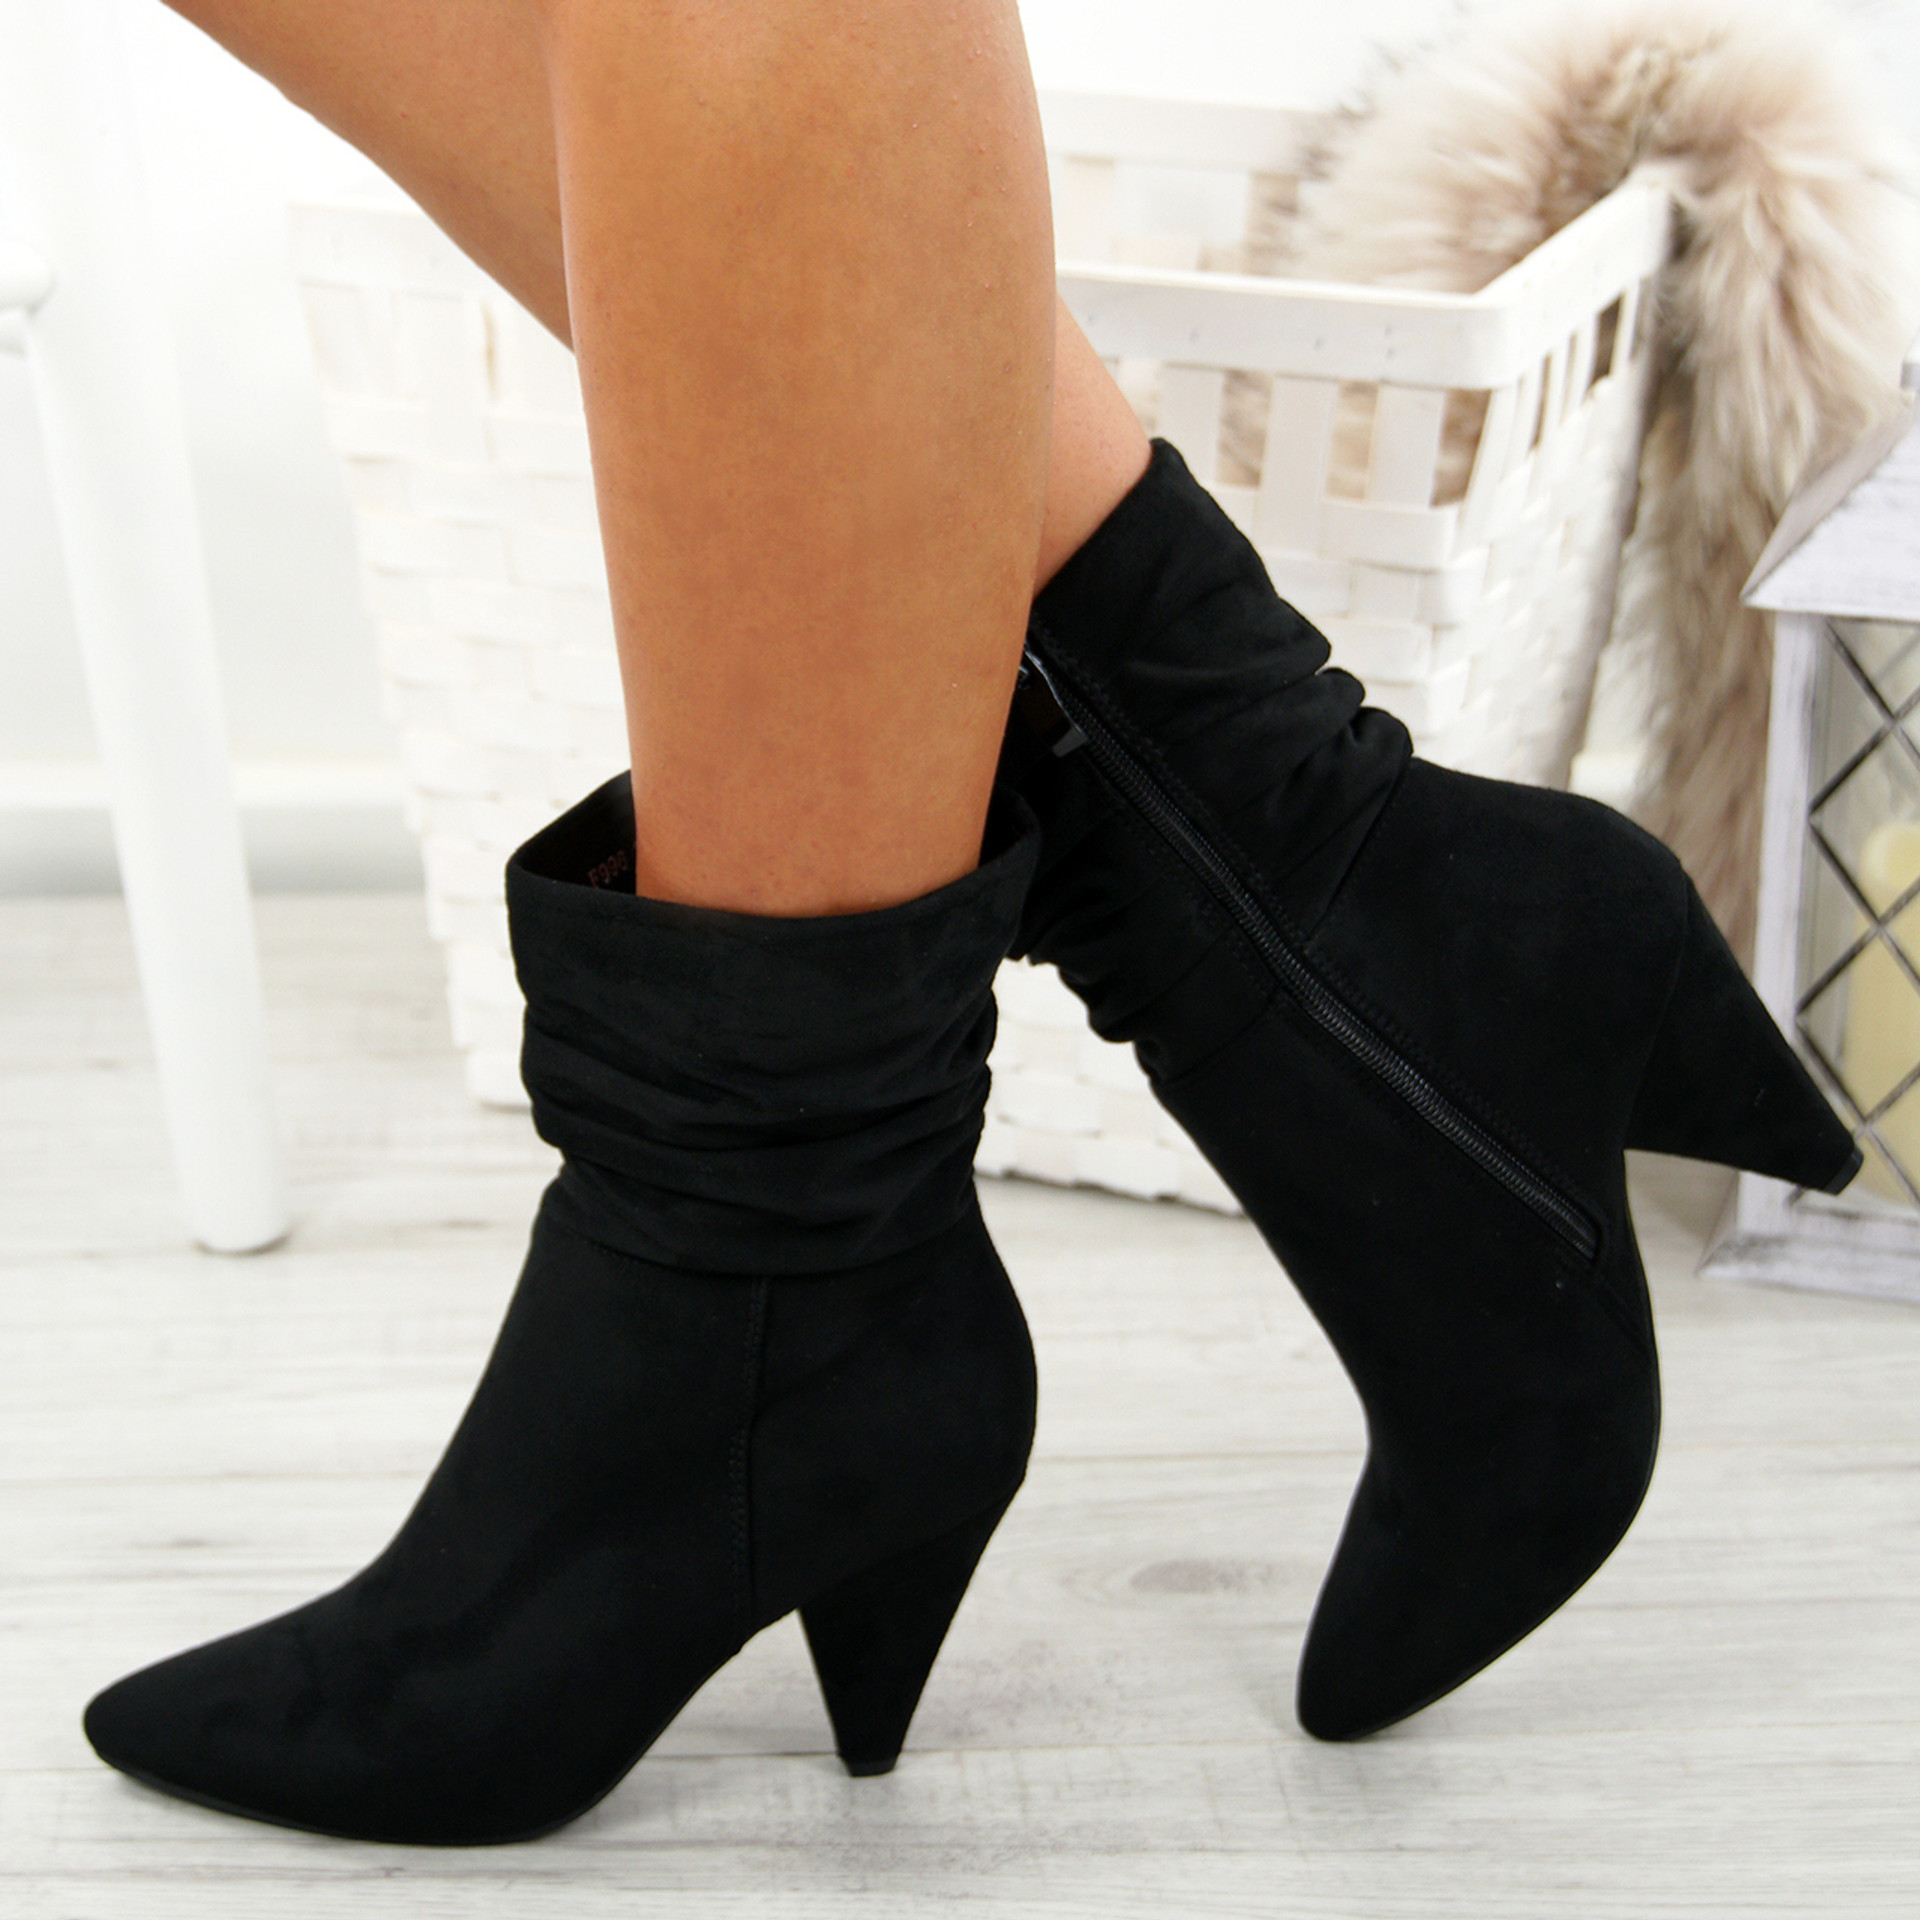 Shop New Look Wide Fit Women's Black Knee High Boots up to 50% Off |  DealDoodle